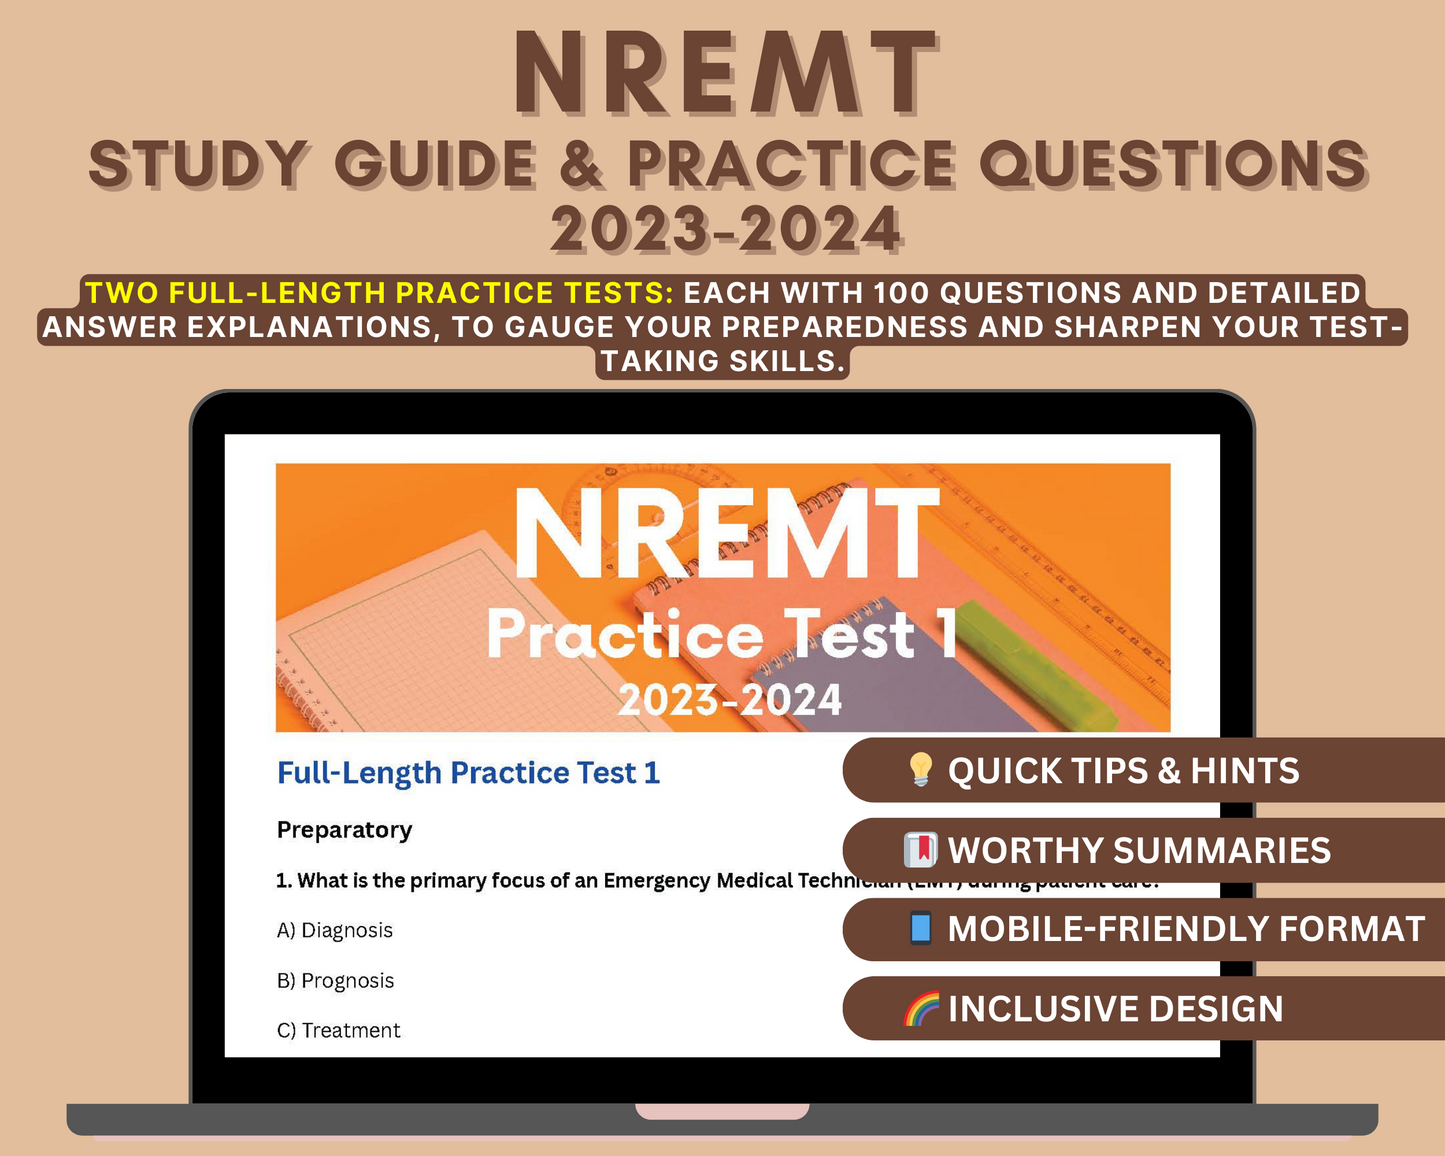 NREMT Study Guide 2023-2024: EMT Certification Prep, Medical Terminology, Pharmacology, Trauma Assessment, Practice Tests & Detailed Answers